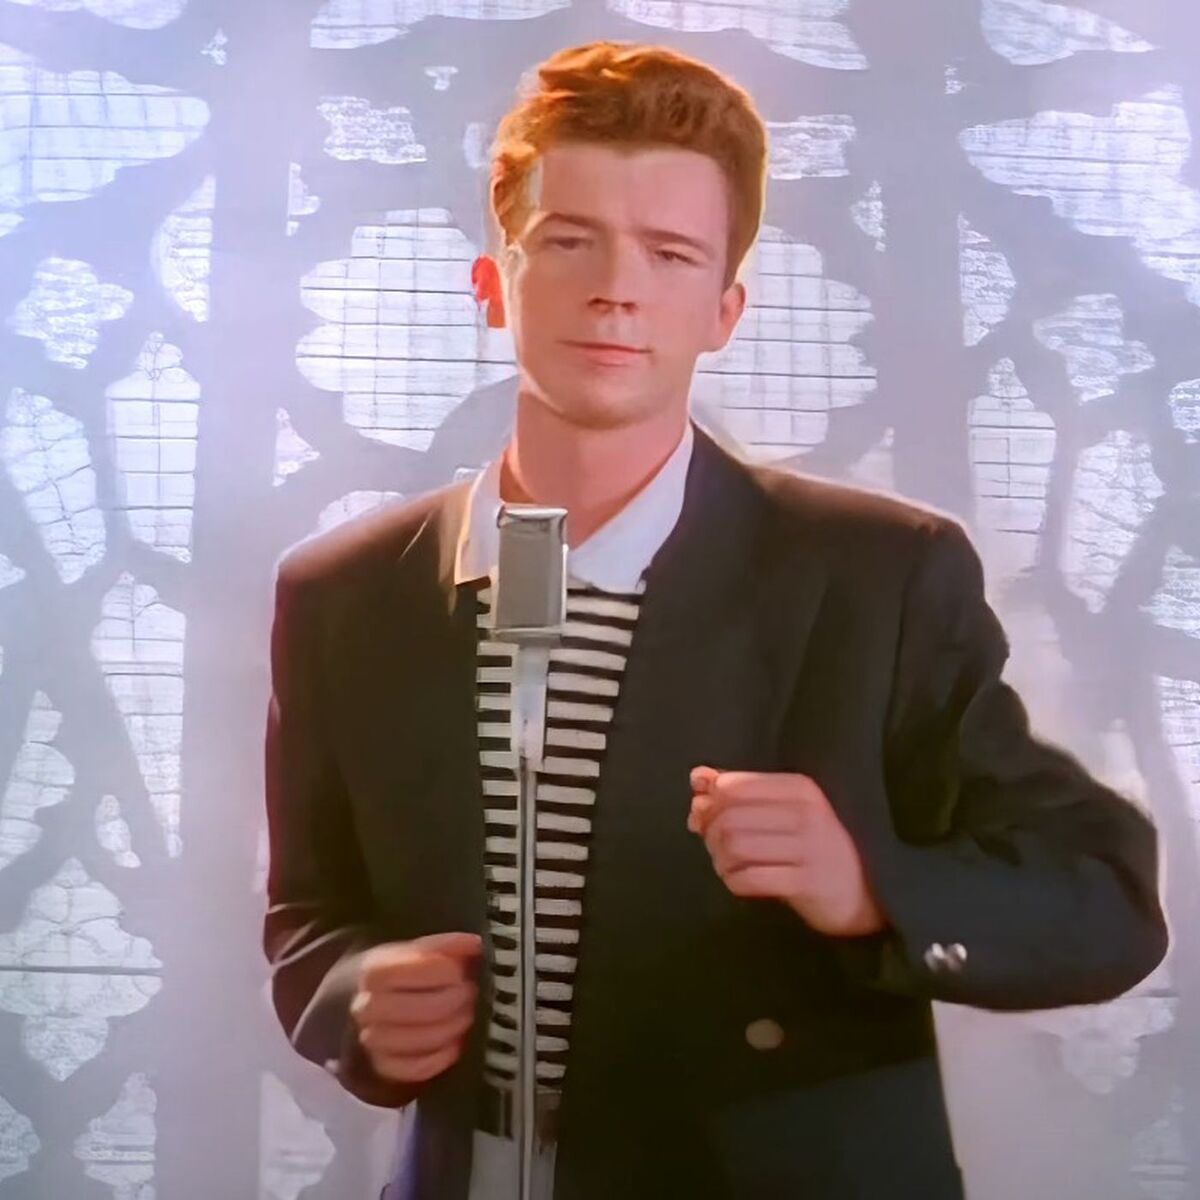 Rickroll service spices up Zoom meetings with Never Gonna Give You Up - CNET